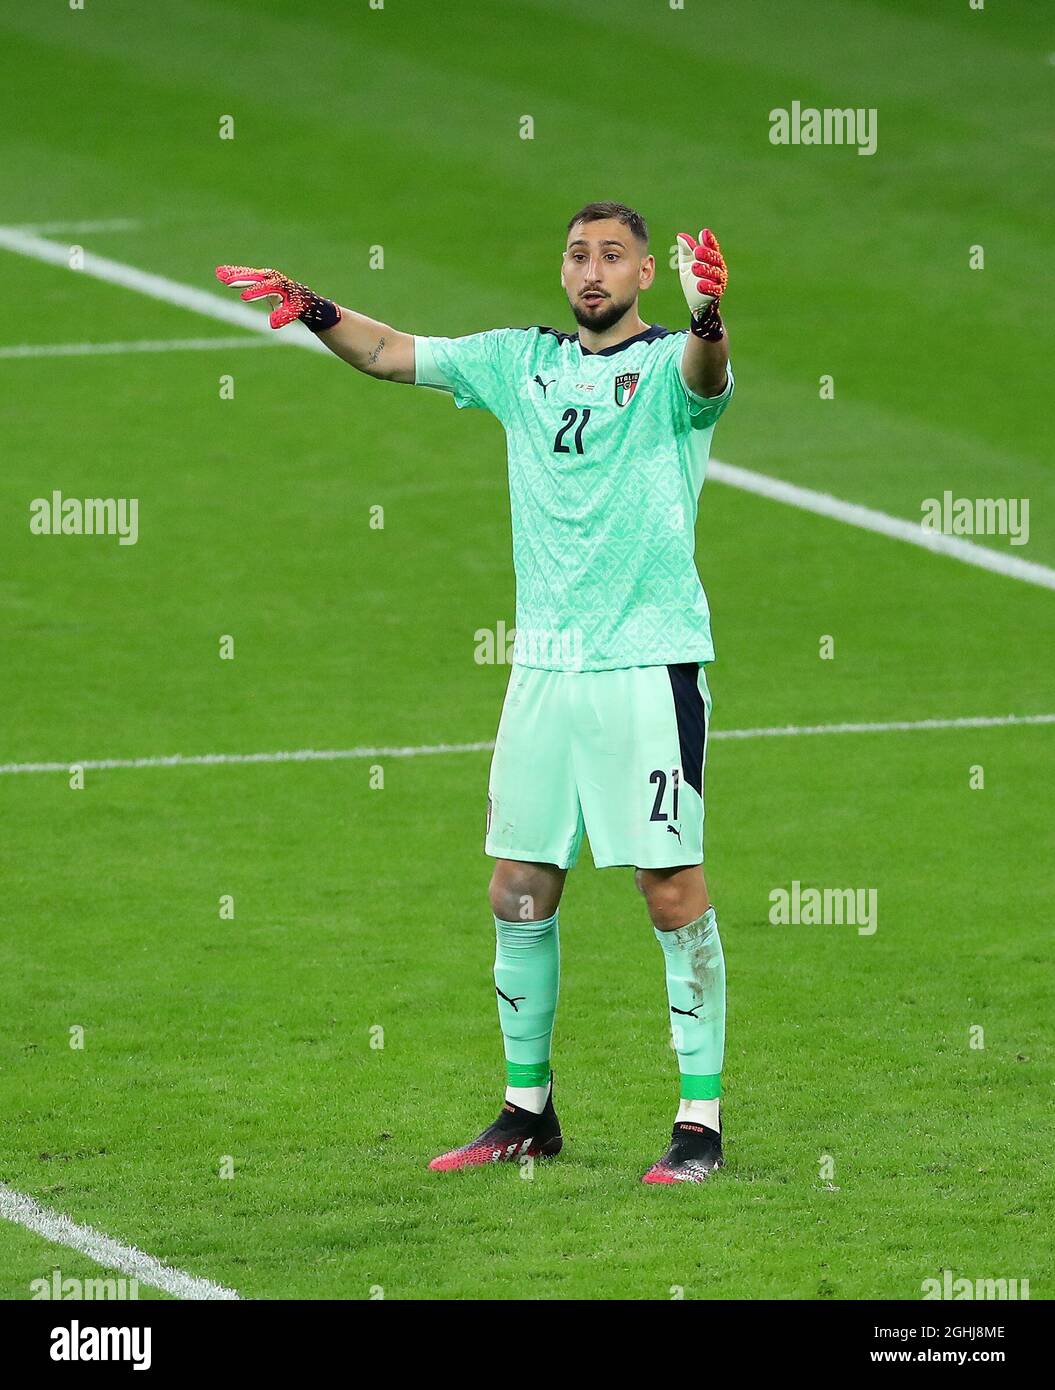 London, England, 26th June 2021. Gianluigi Donnarumma of Italy during the UEFA European Championships match at Wembley Stadium, London. Picture credit should read: David Klein / Sportimage via PA Images Stock Photo